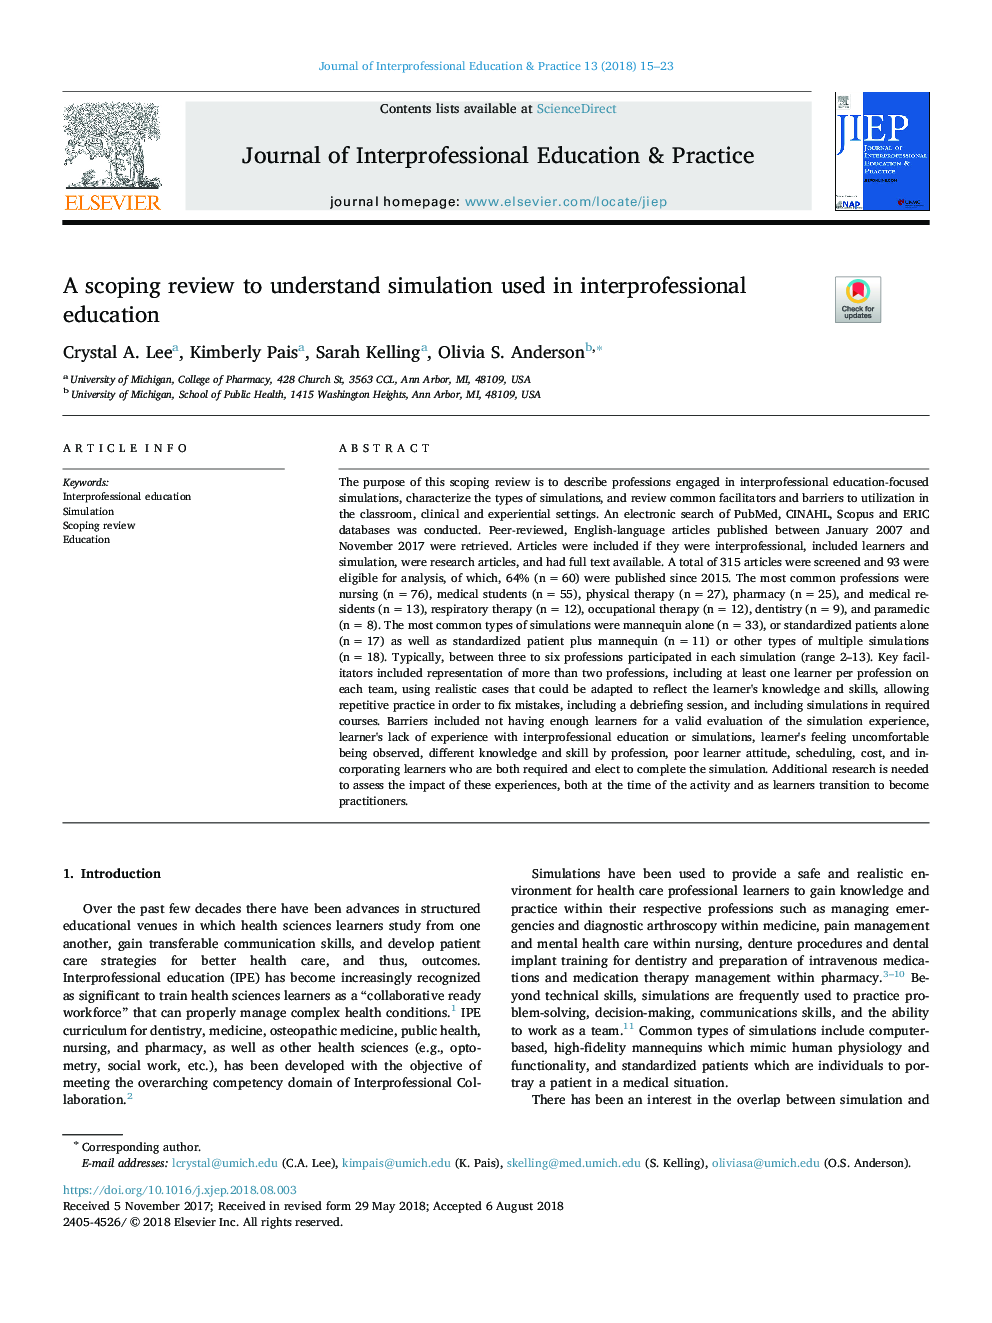 A scoping review to understand simulation used in interprofessional education